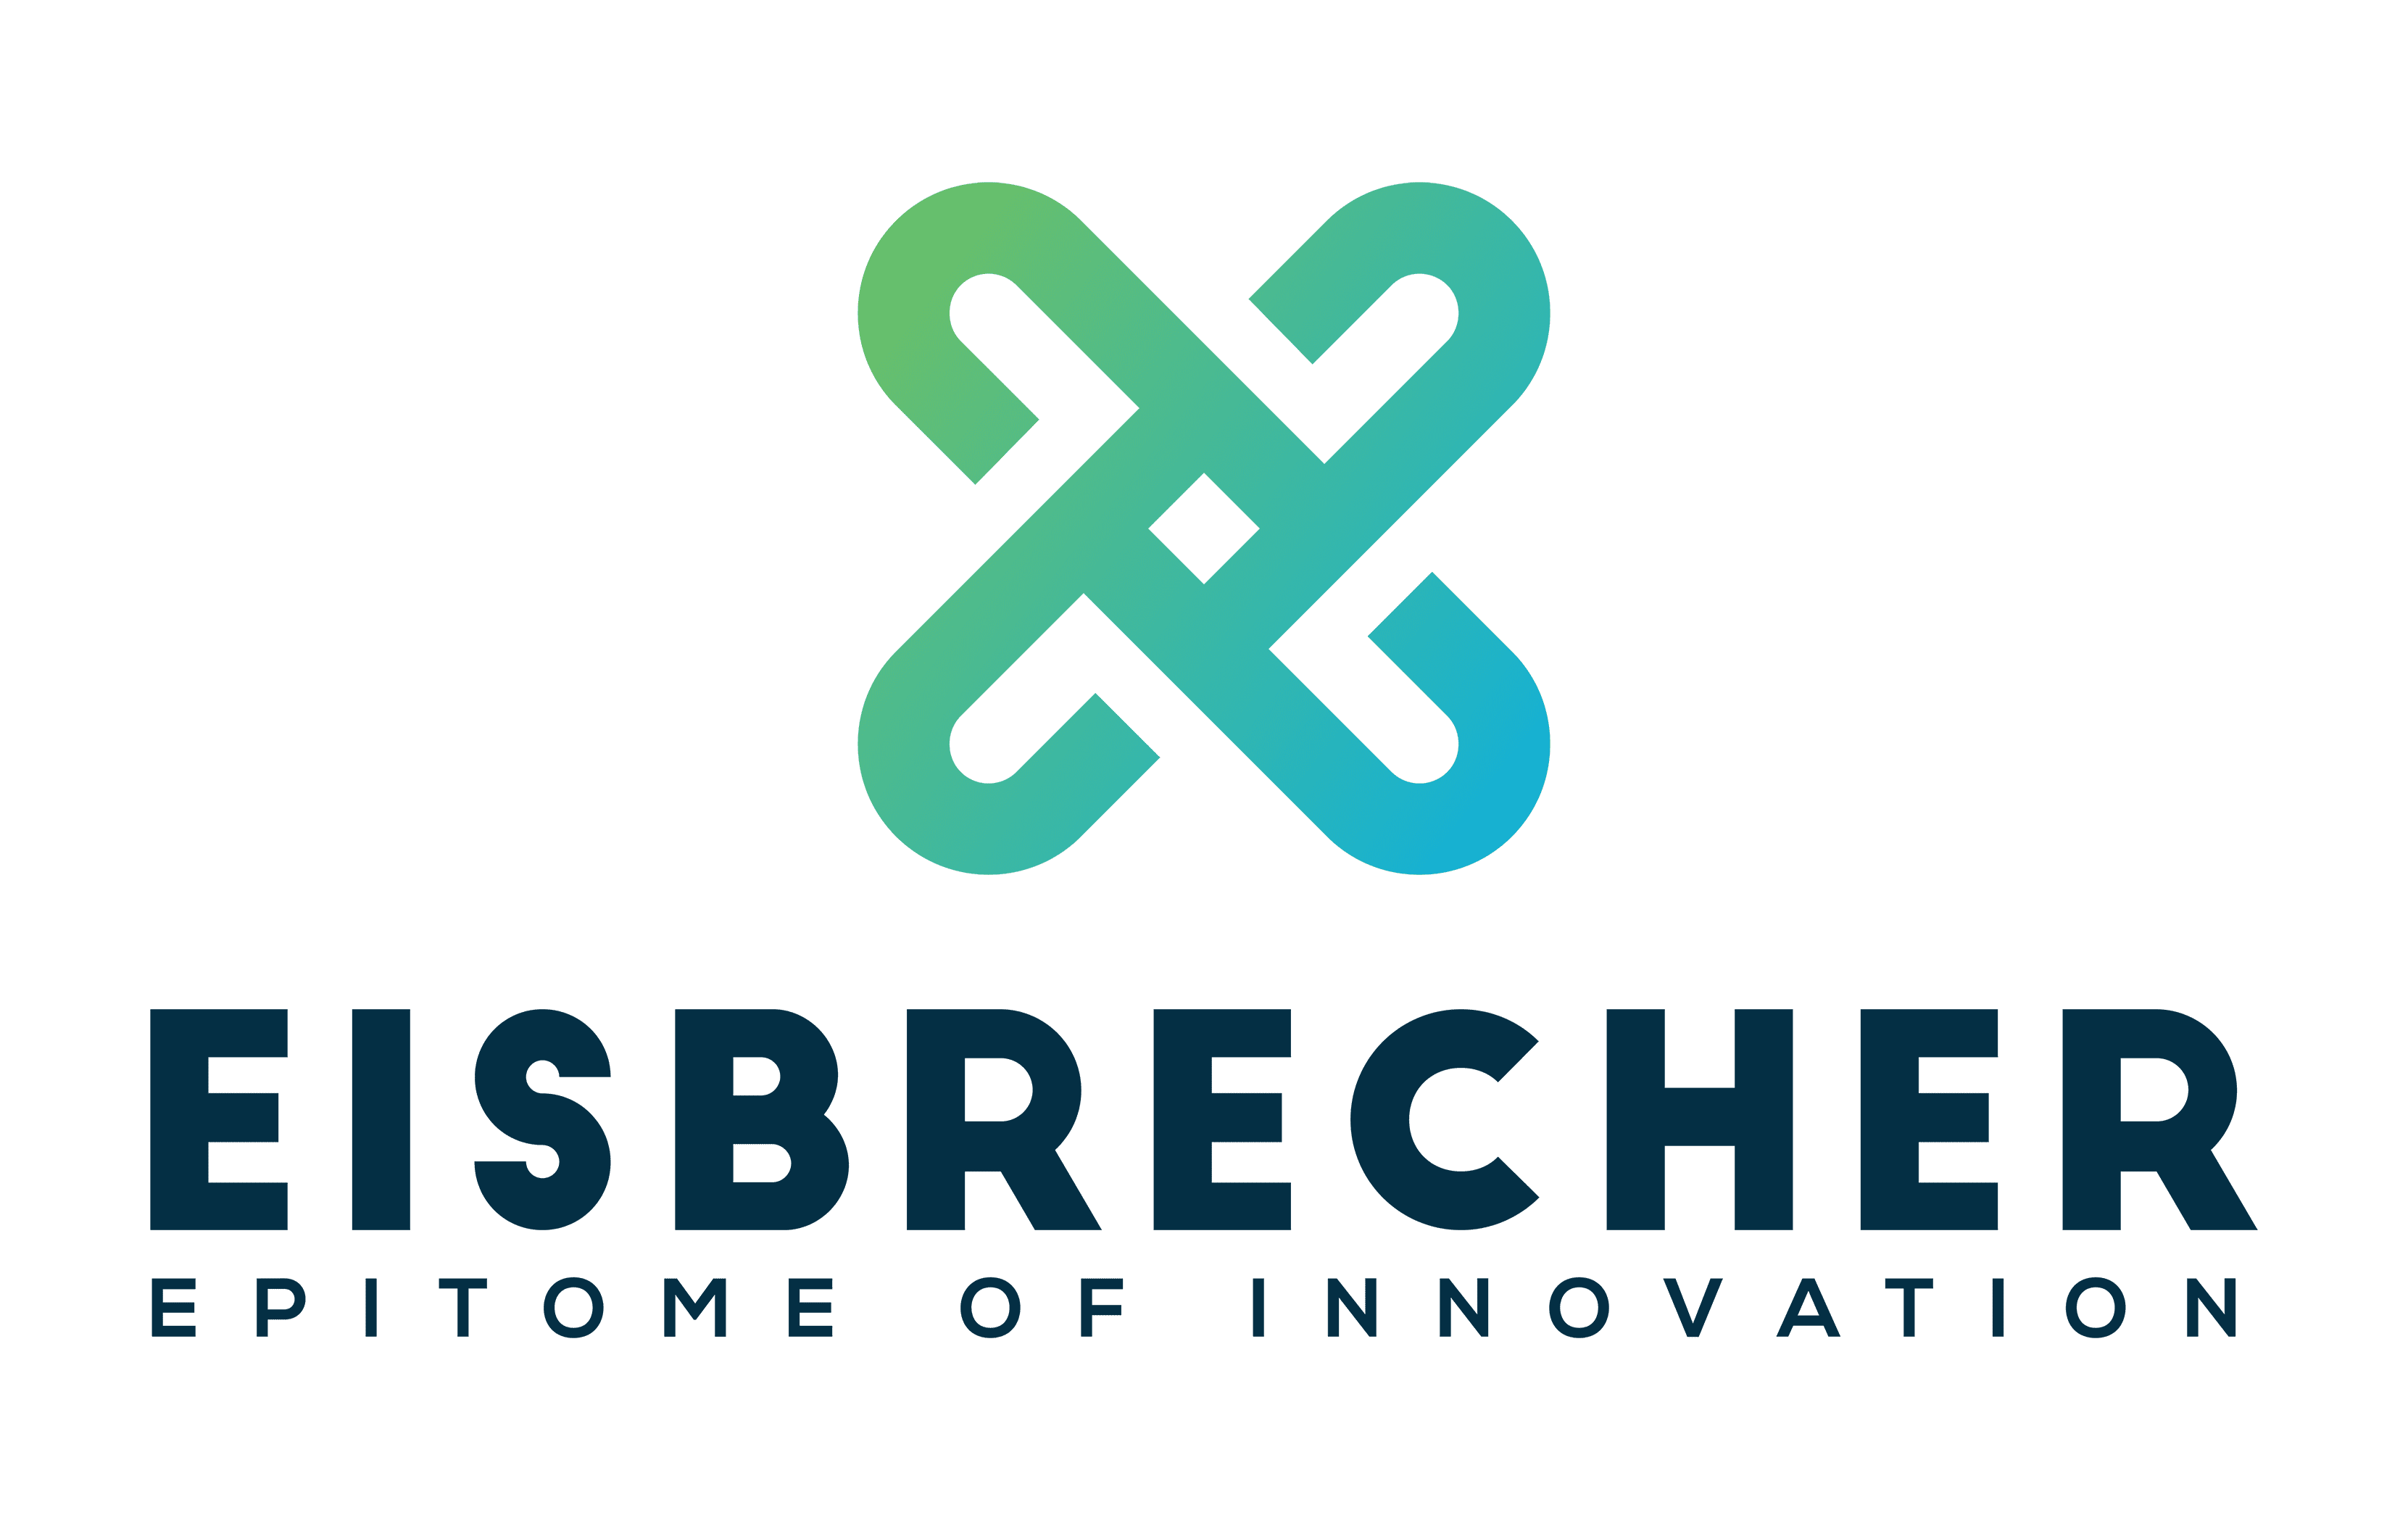 Eisbrecher - Printing, Signage, Exibitions Stands, Interior Fit-out Works